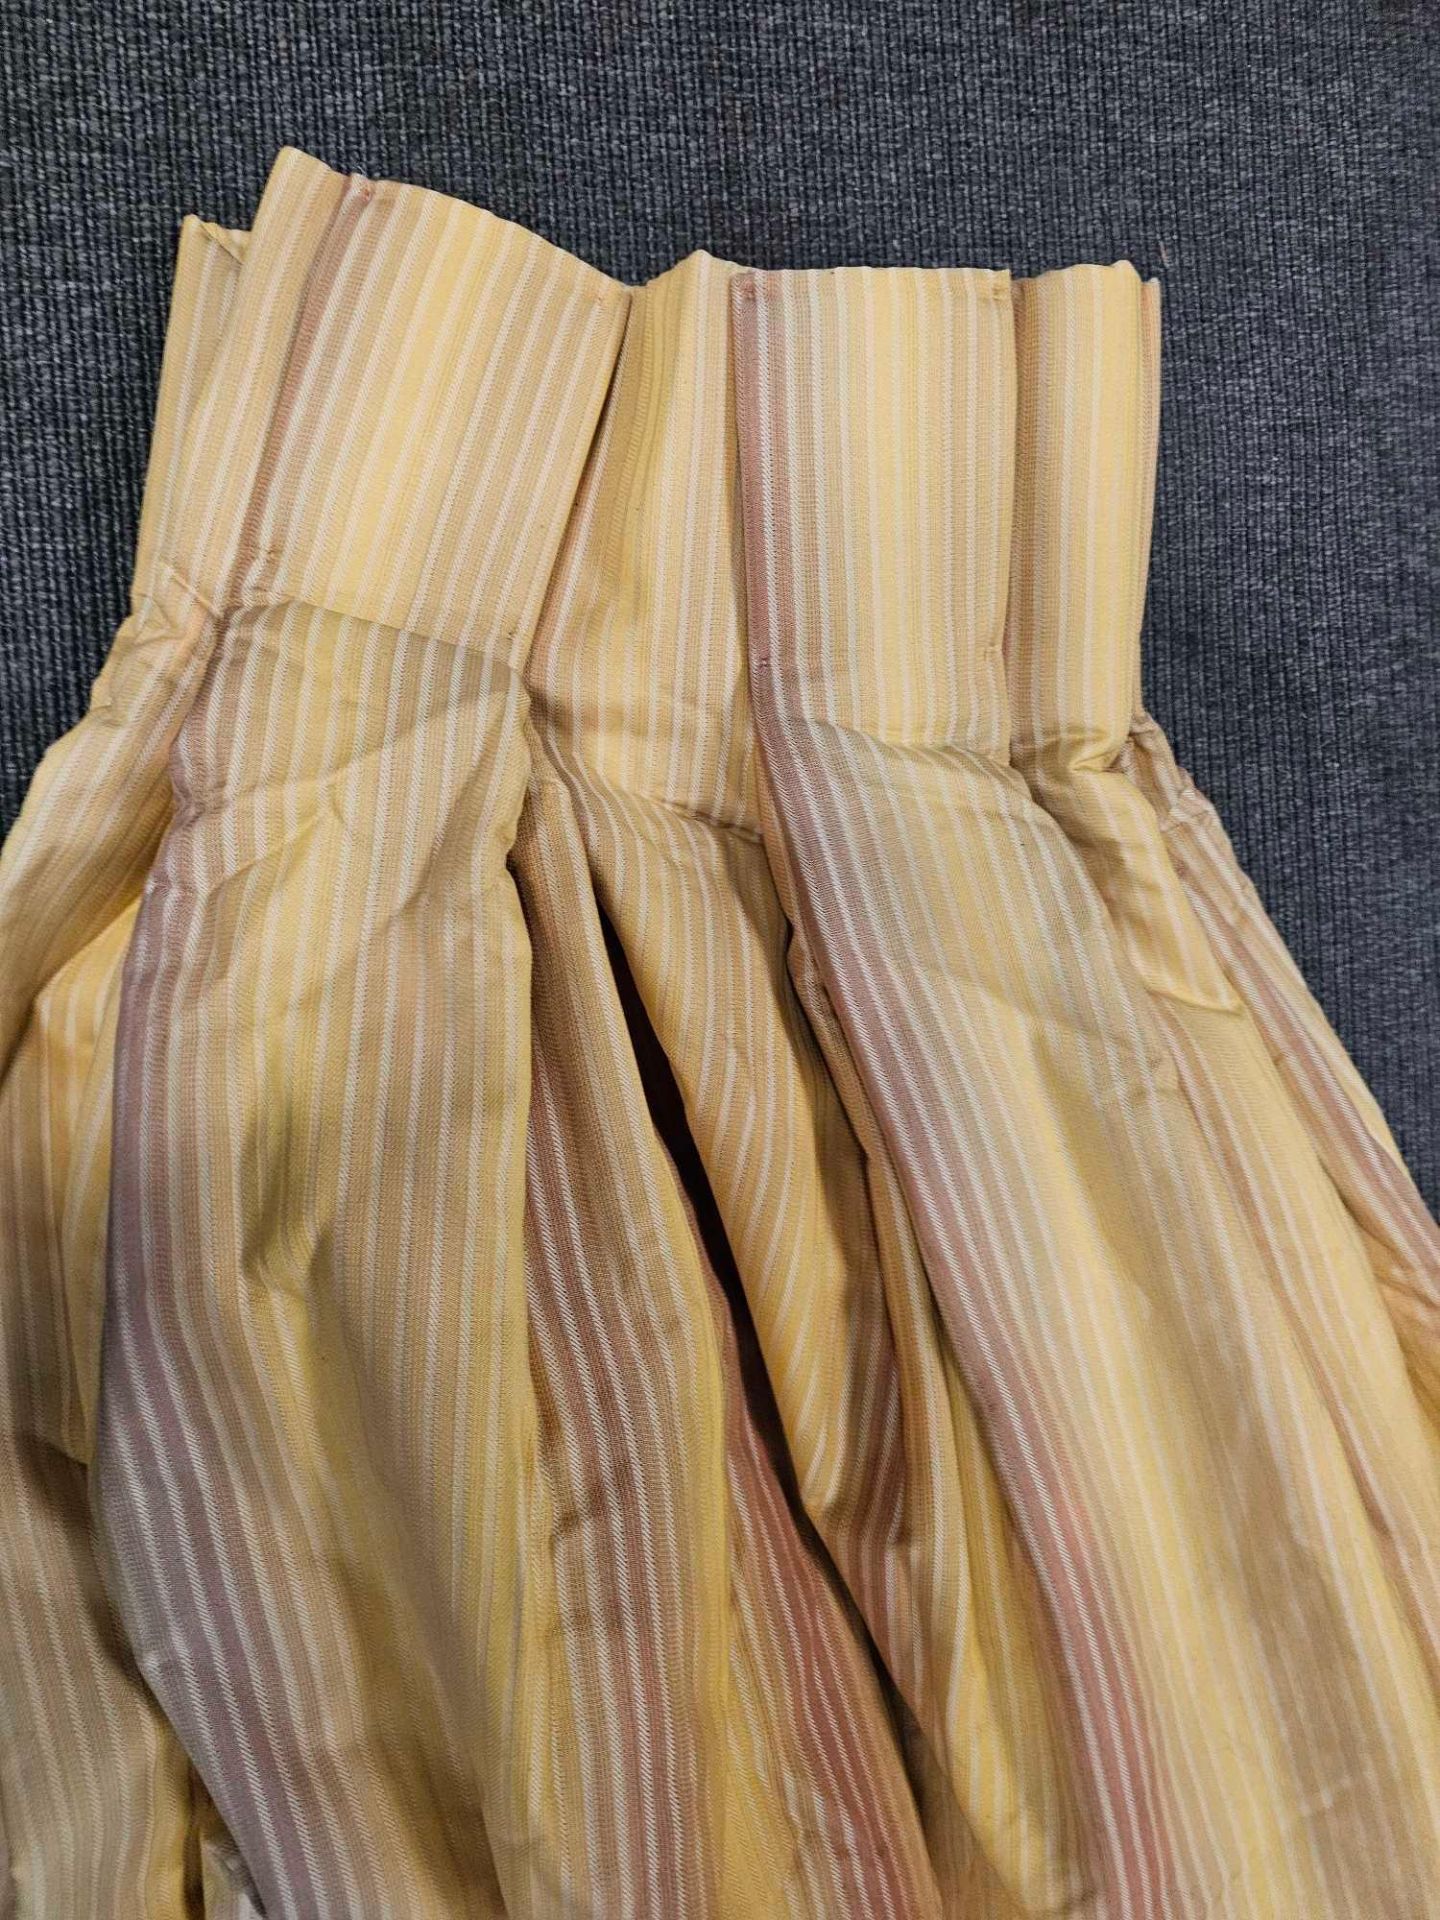 Single Silk Striped Curtain Pink /Black Size 60 x 215cm Single Silk Curtain Yellow/Red Stripes - Image 4 of 7